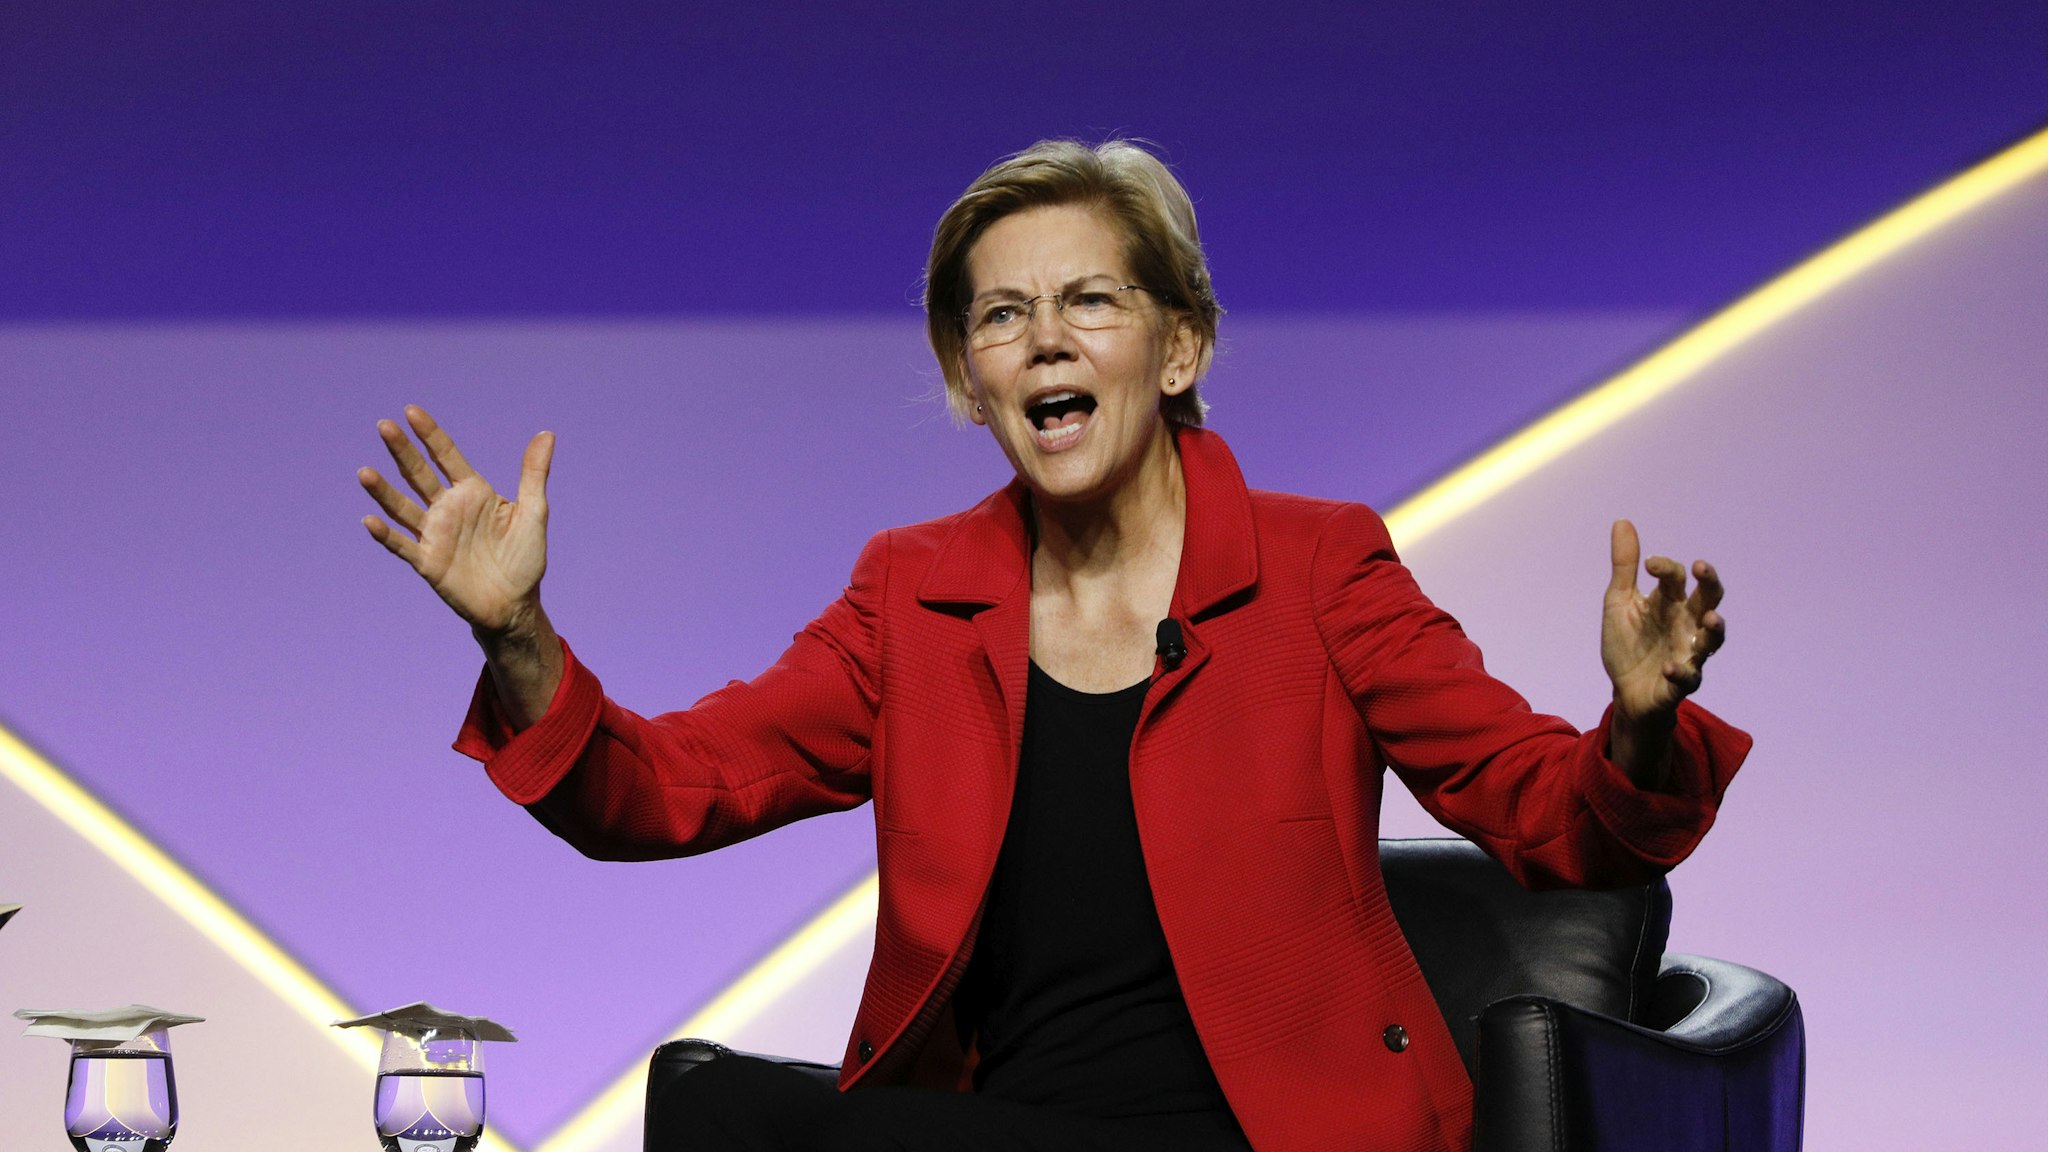 DETROIT, MI - JULY 24: Democratic presidential candidate U.S. Sen. Elizabeth Warren (D-MA) participates in a Presidential Candidates Forum at the NAACP 110th National Convention on July 24, 2019 in Detroit, Michigan. The theme of this years Convention is, When We Fight, We Win. (Photo by Bill Pugliano/Getty Images)